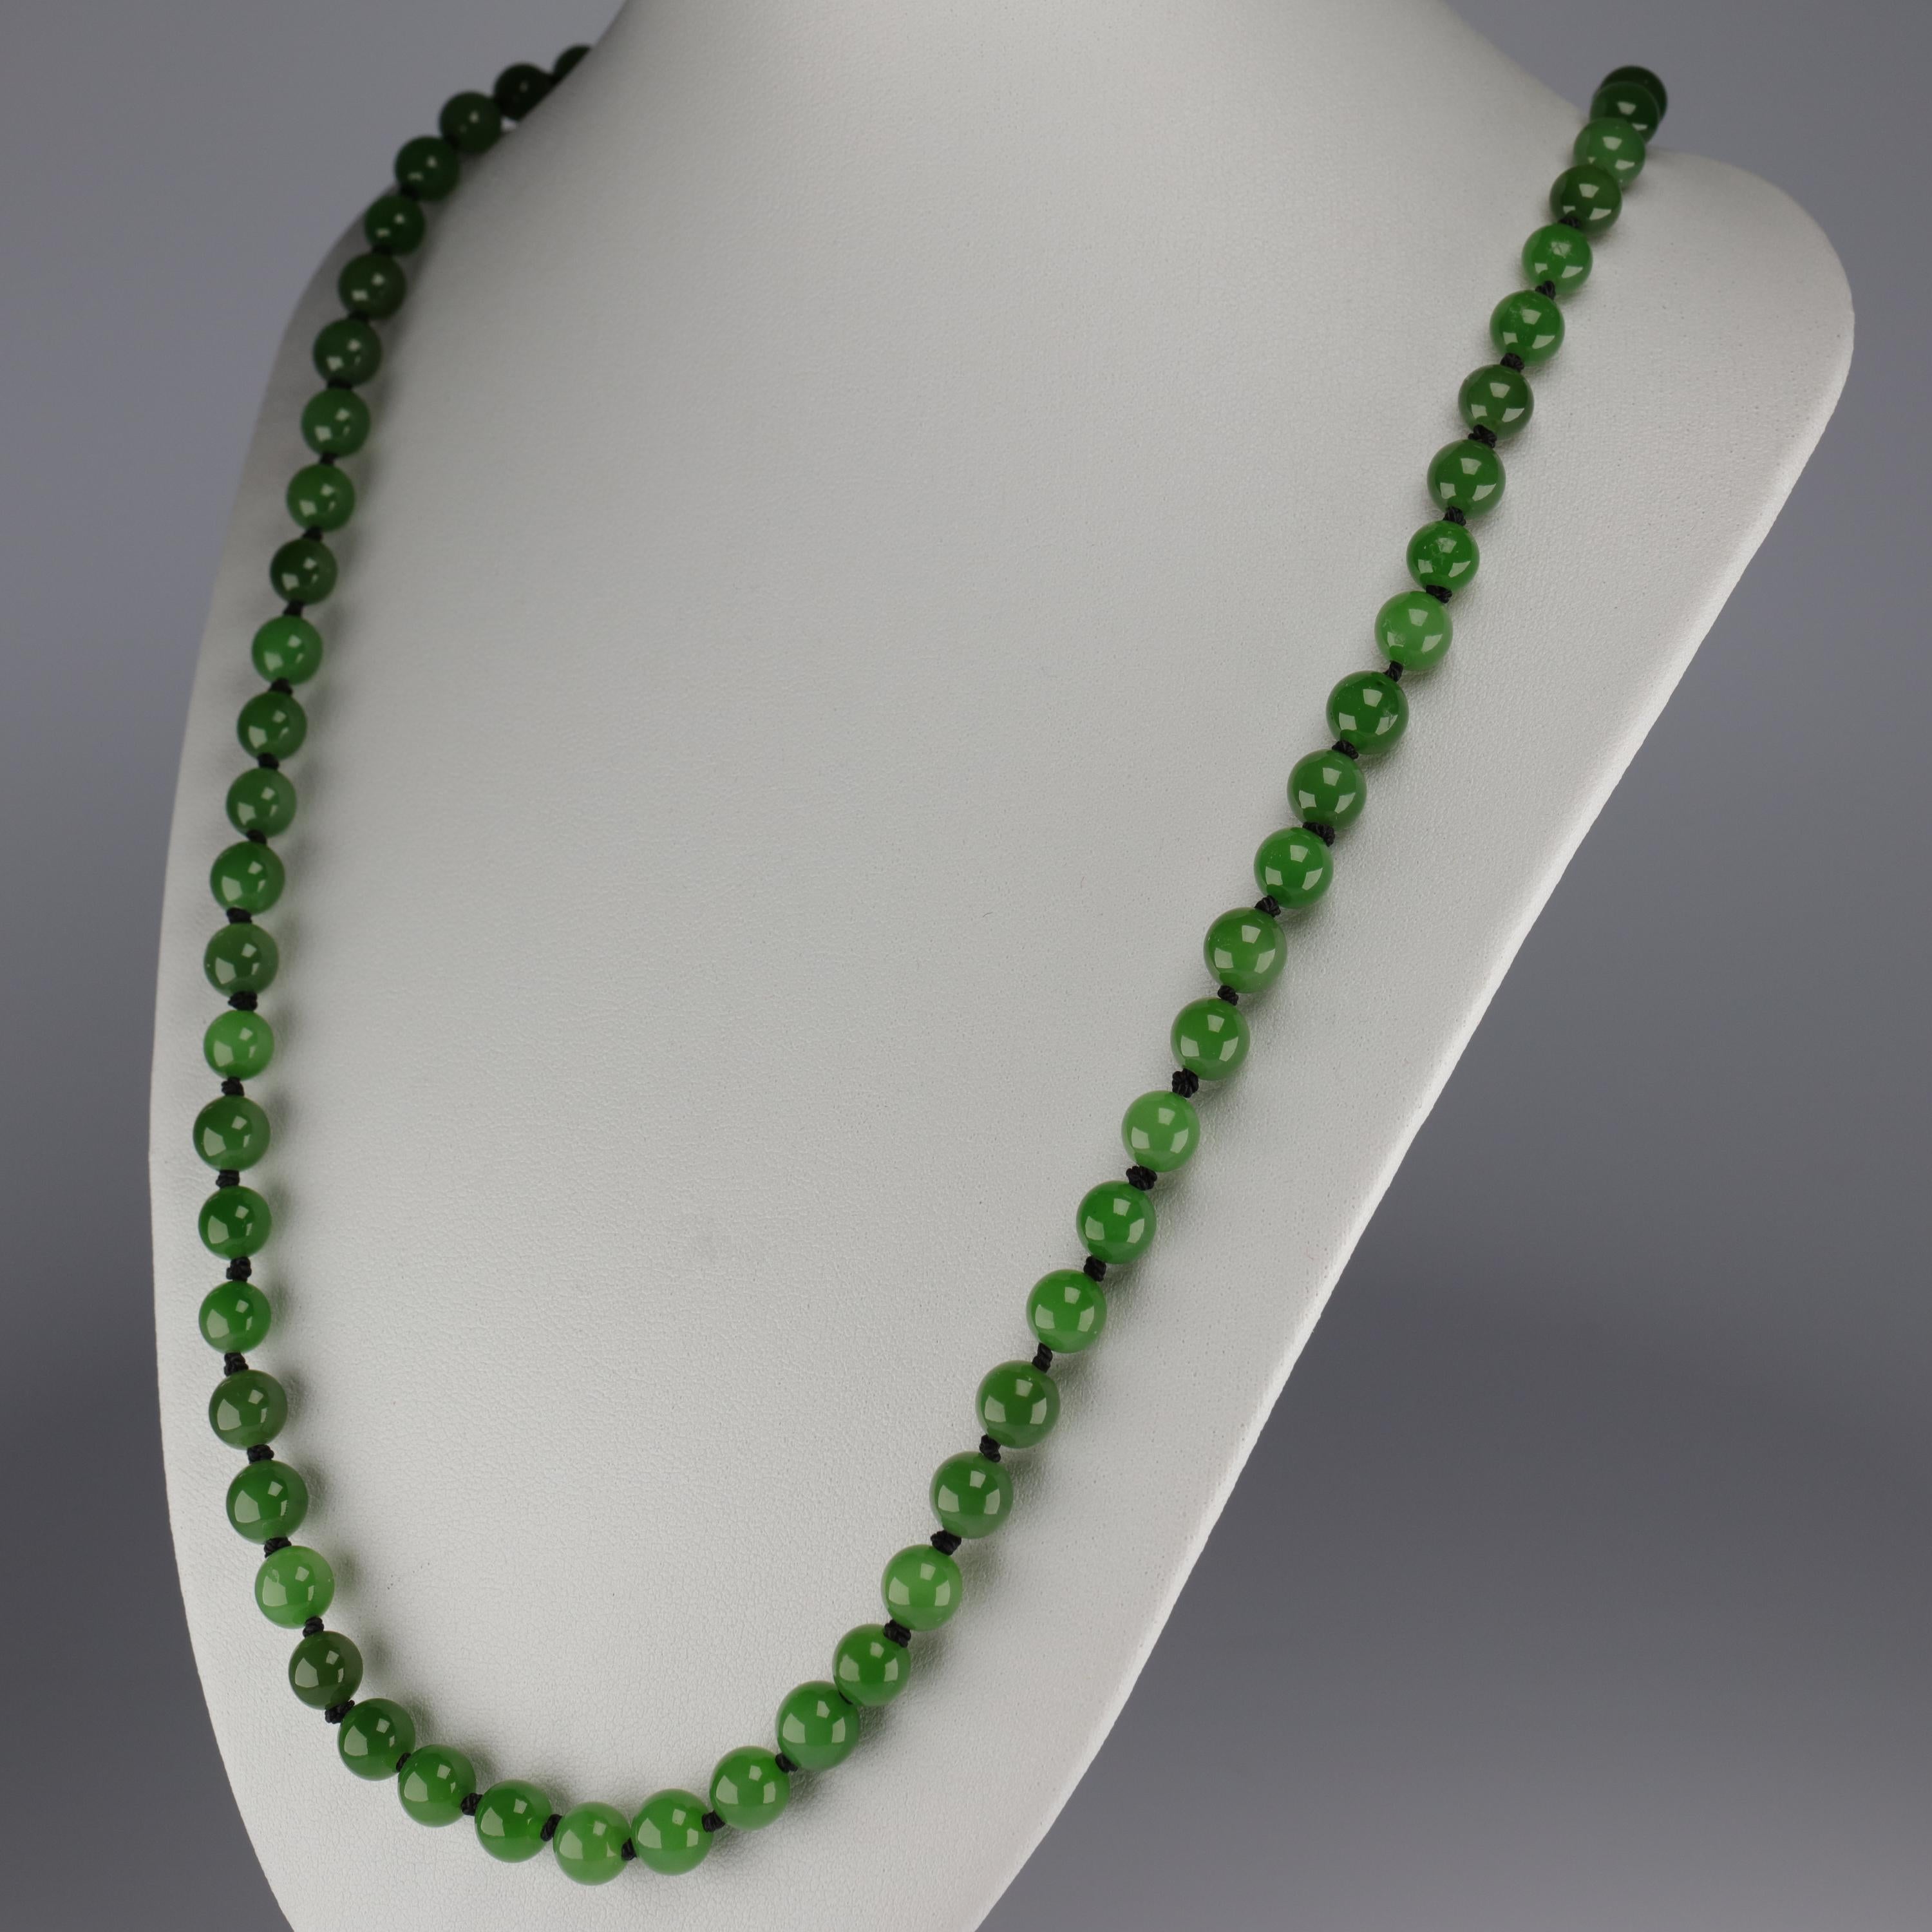 Contemporary Jade Necklace with Rare Chatoyancy Certified Untreated